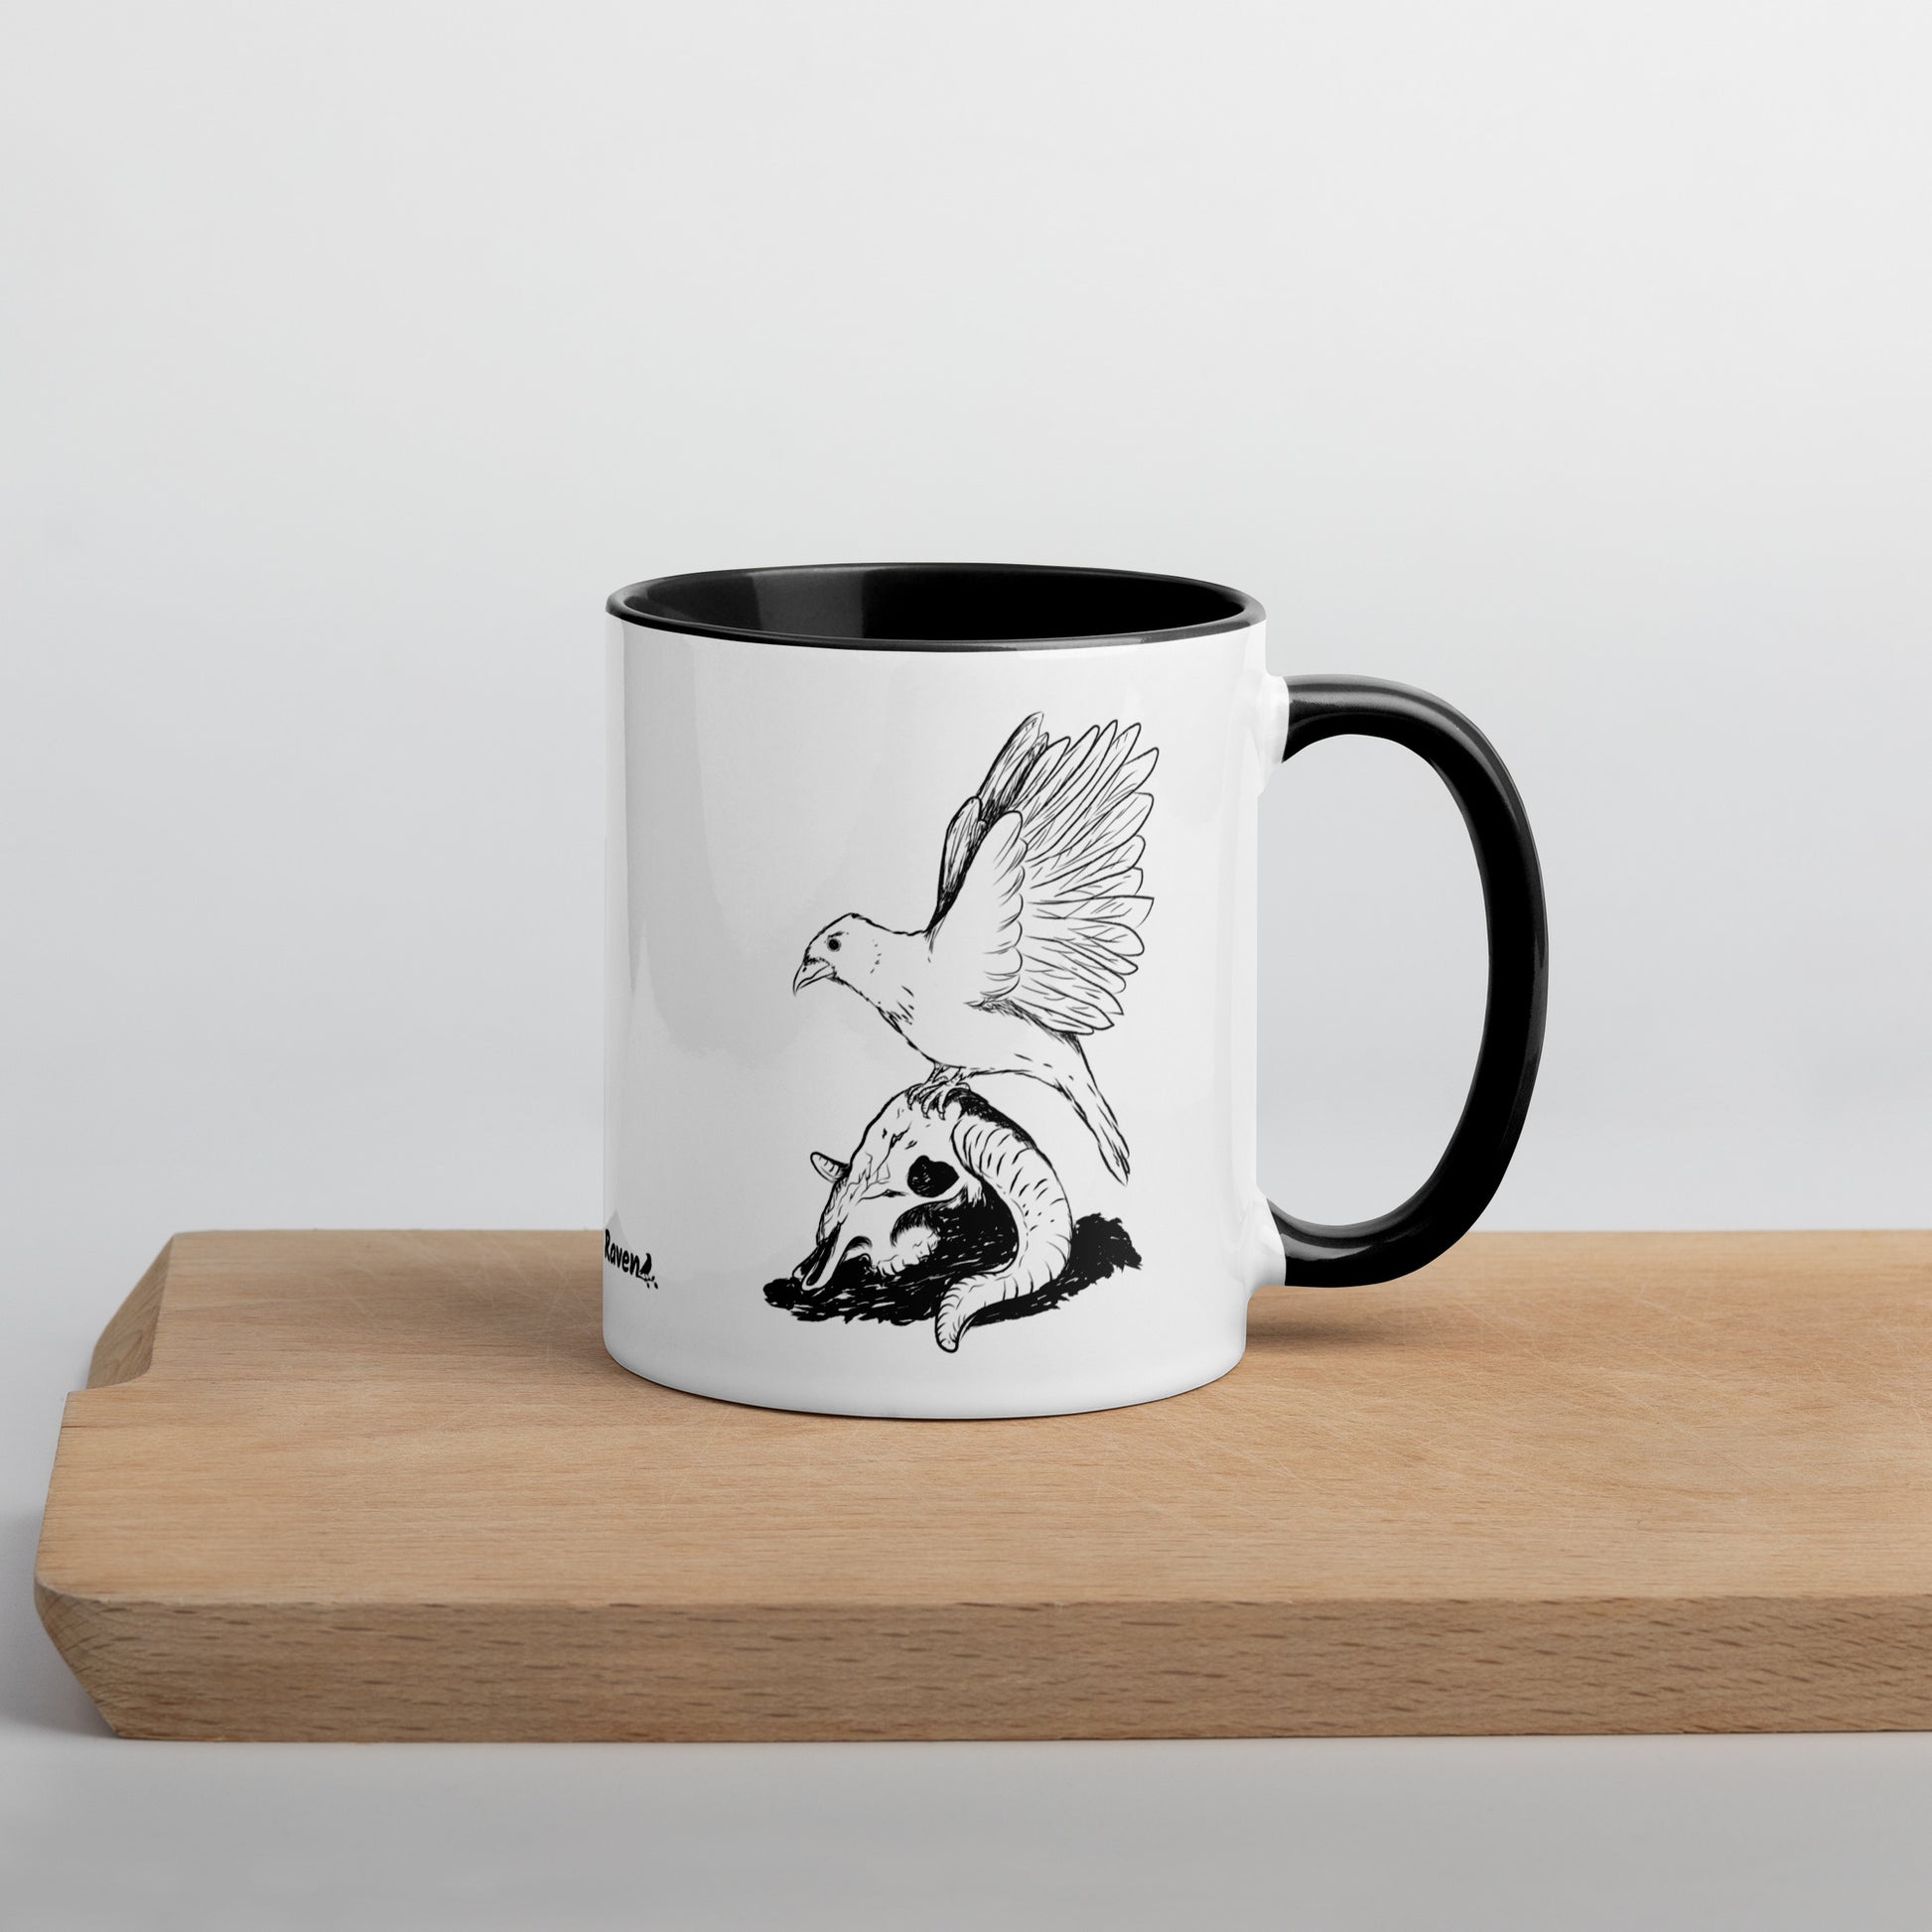 11 ounce white ceramic mug with black handle and inside. Features a double sided print of Reflections, a design with a crow sitting on a sheep skull. Dishwasher and microwave safe. Shown on wooden cutting board.